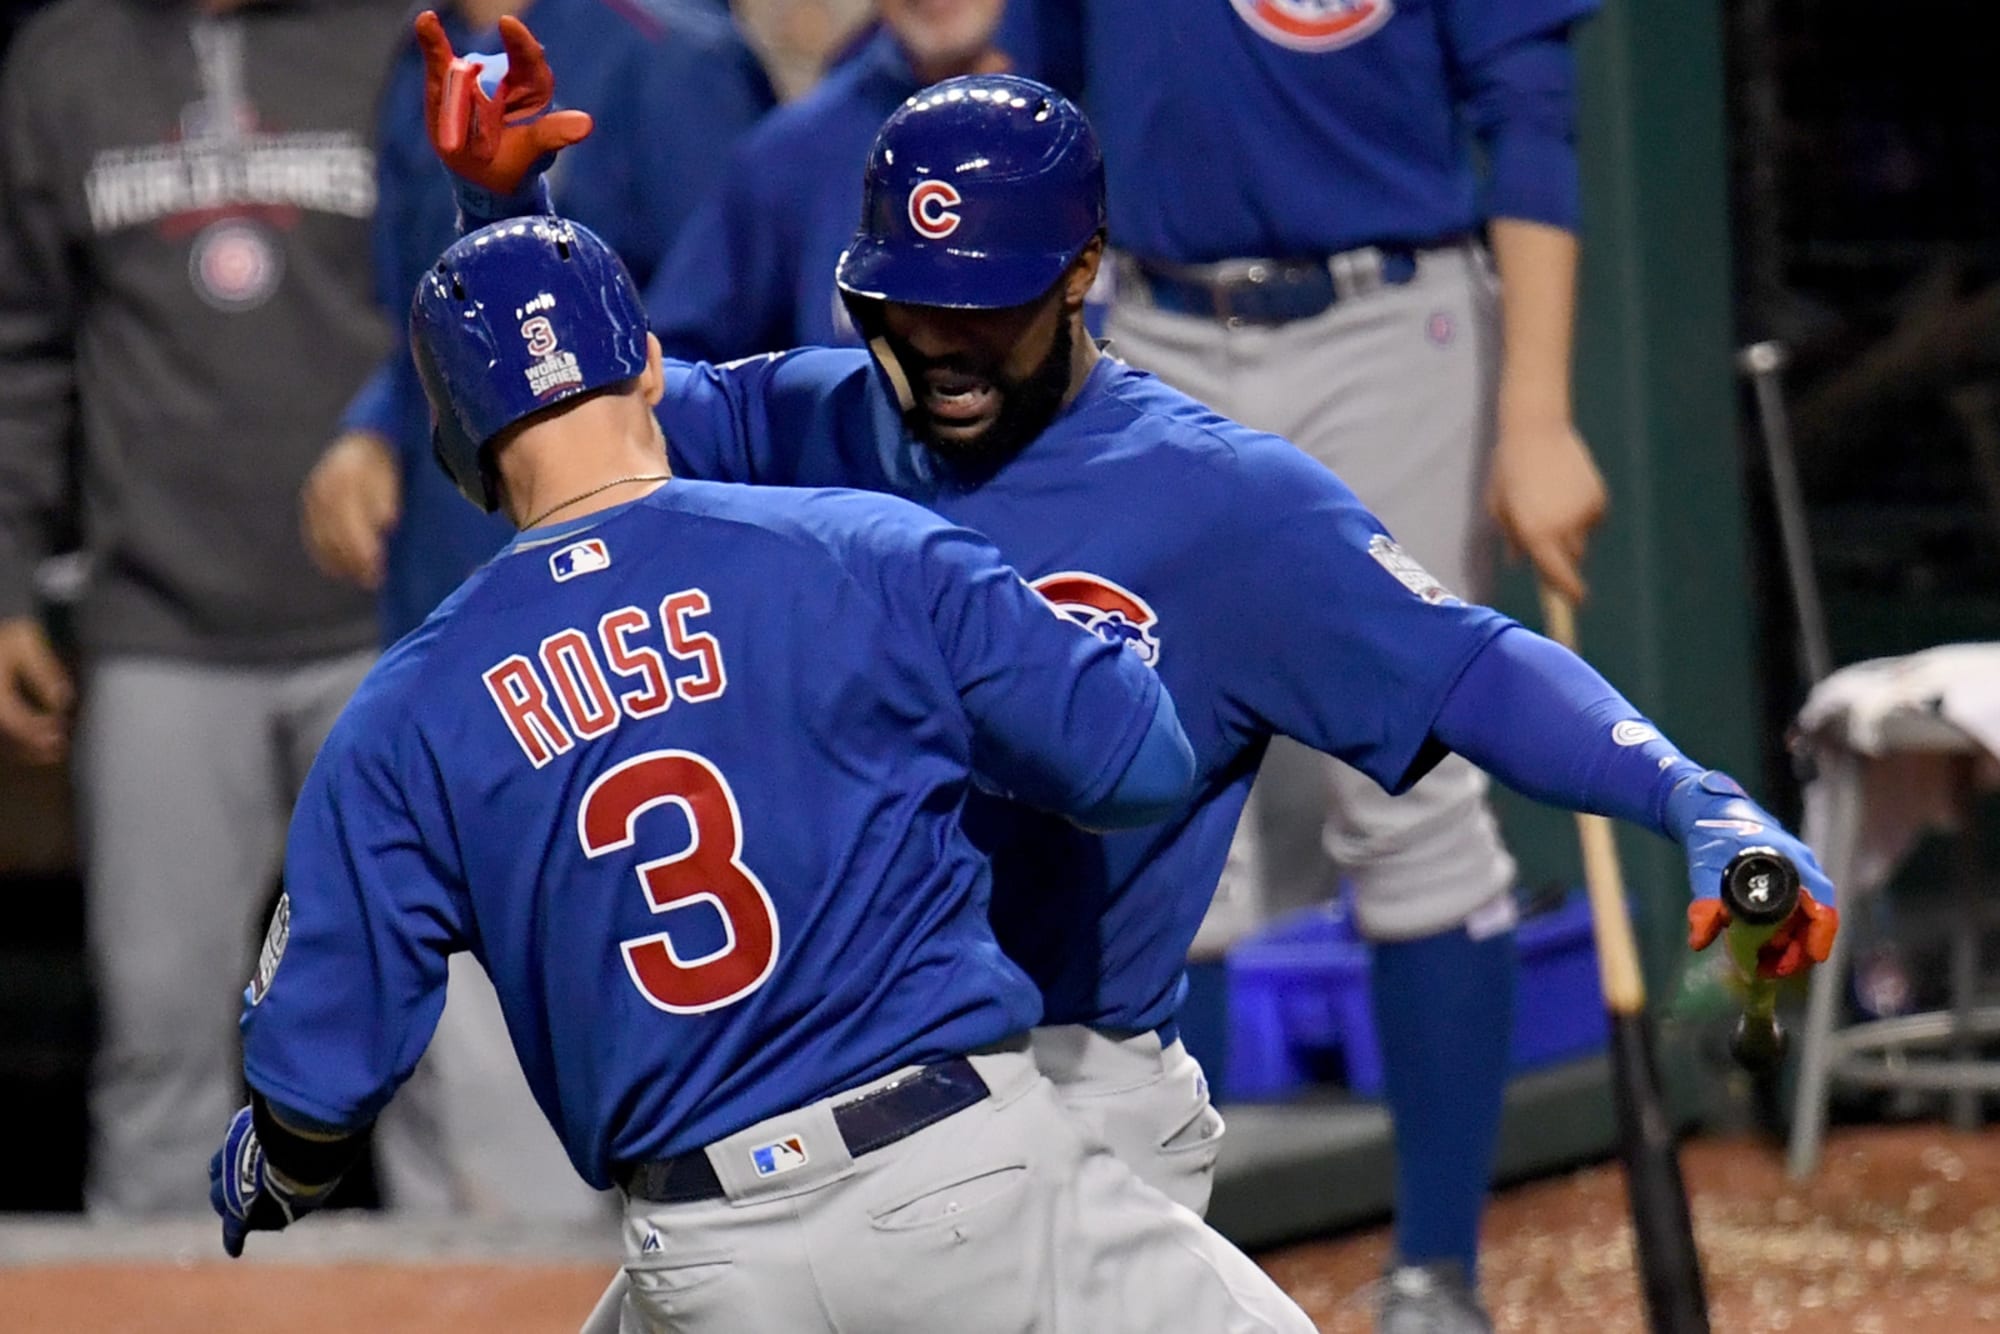 David Ross' final game is winning the World Series with the Cubs